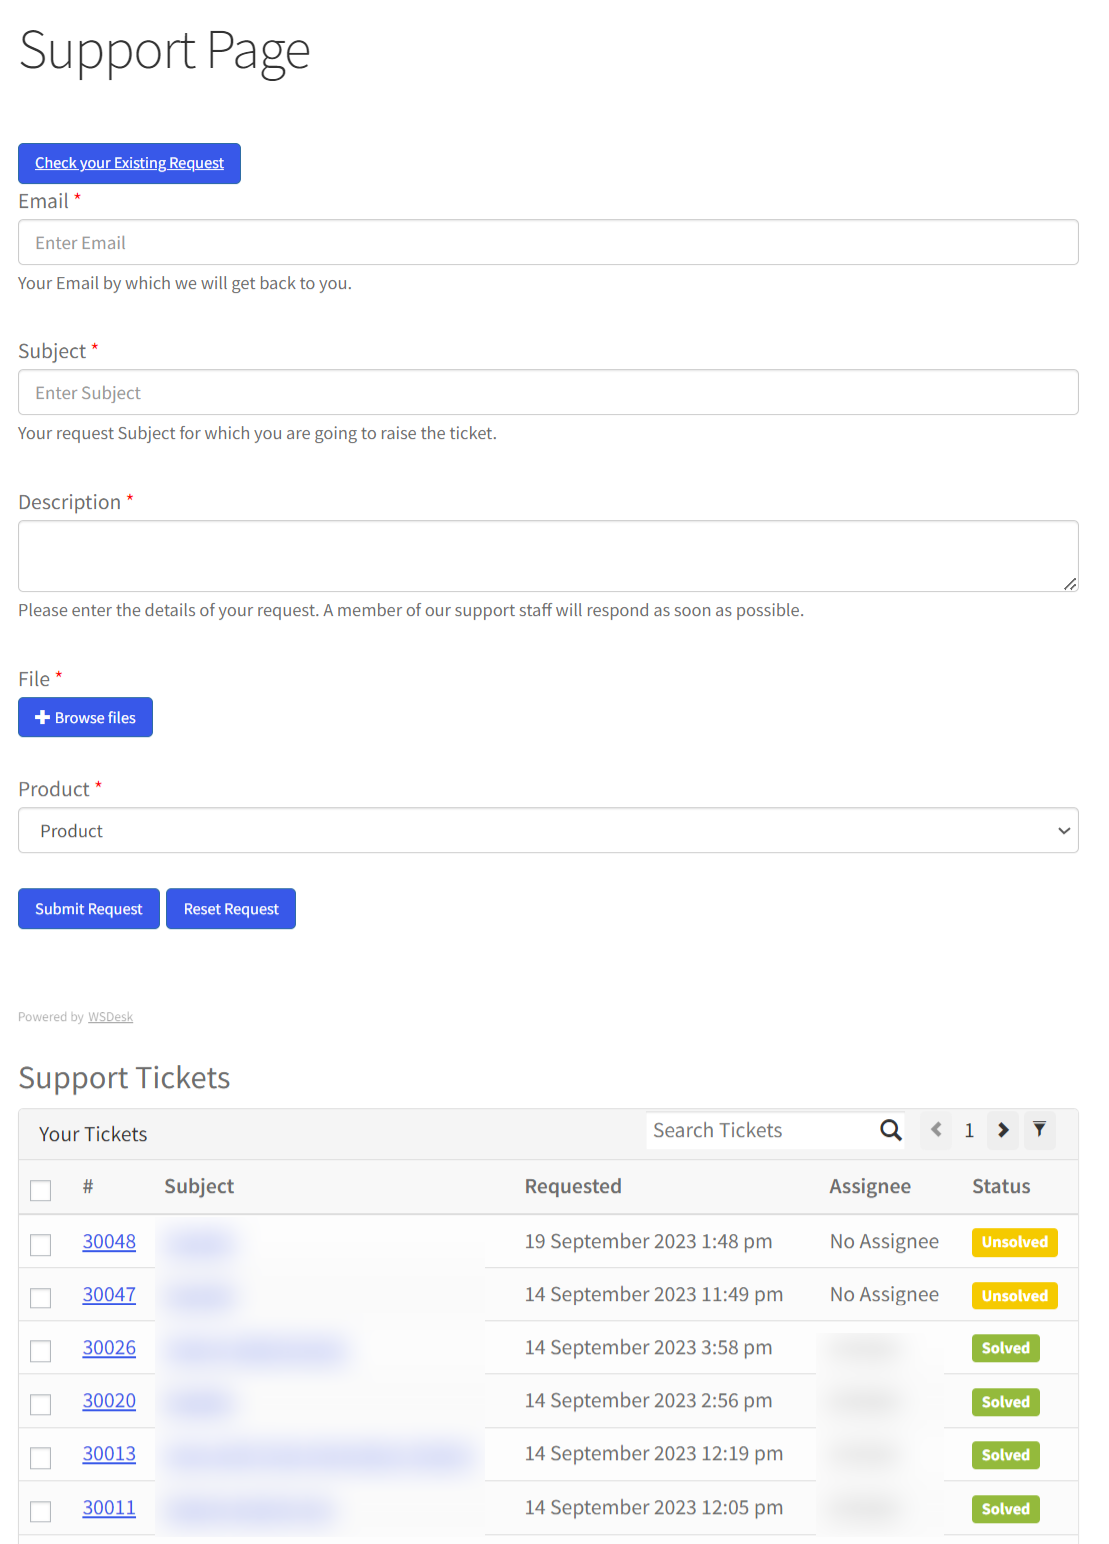 Including a support form alongside existing tickets